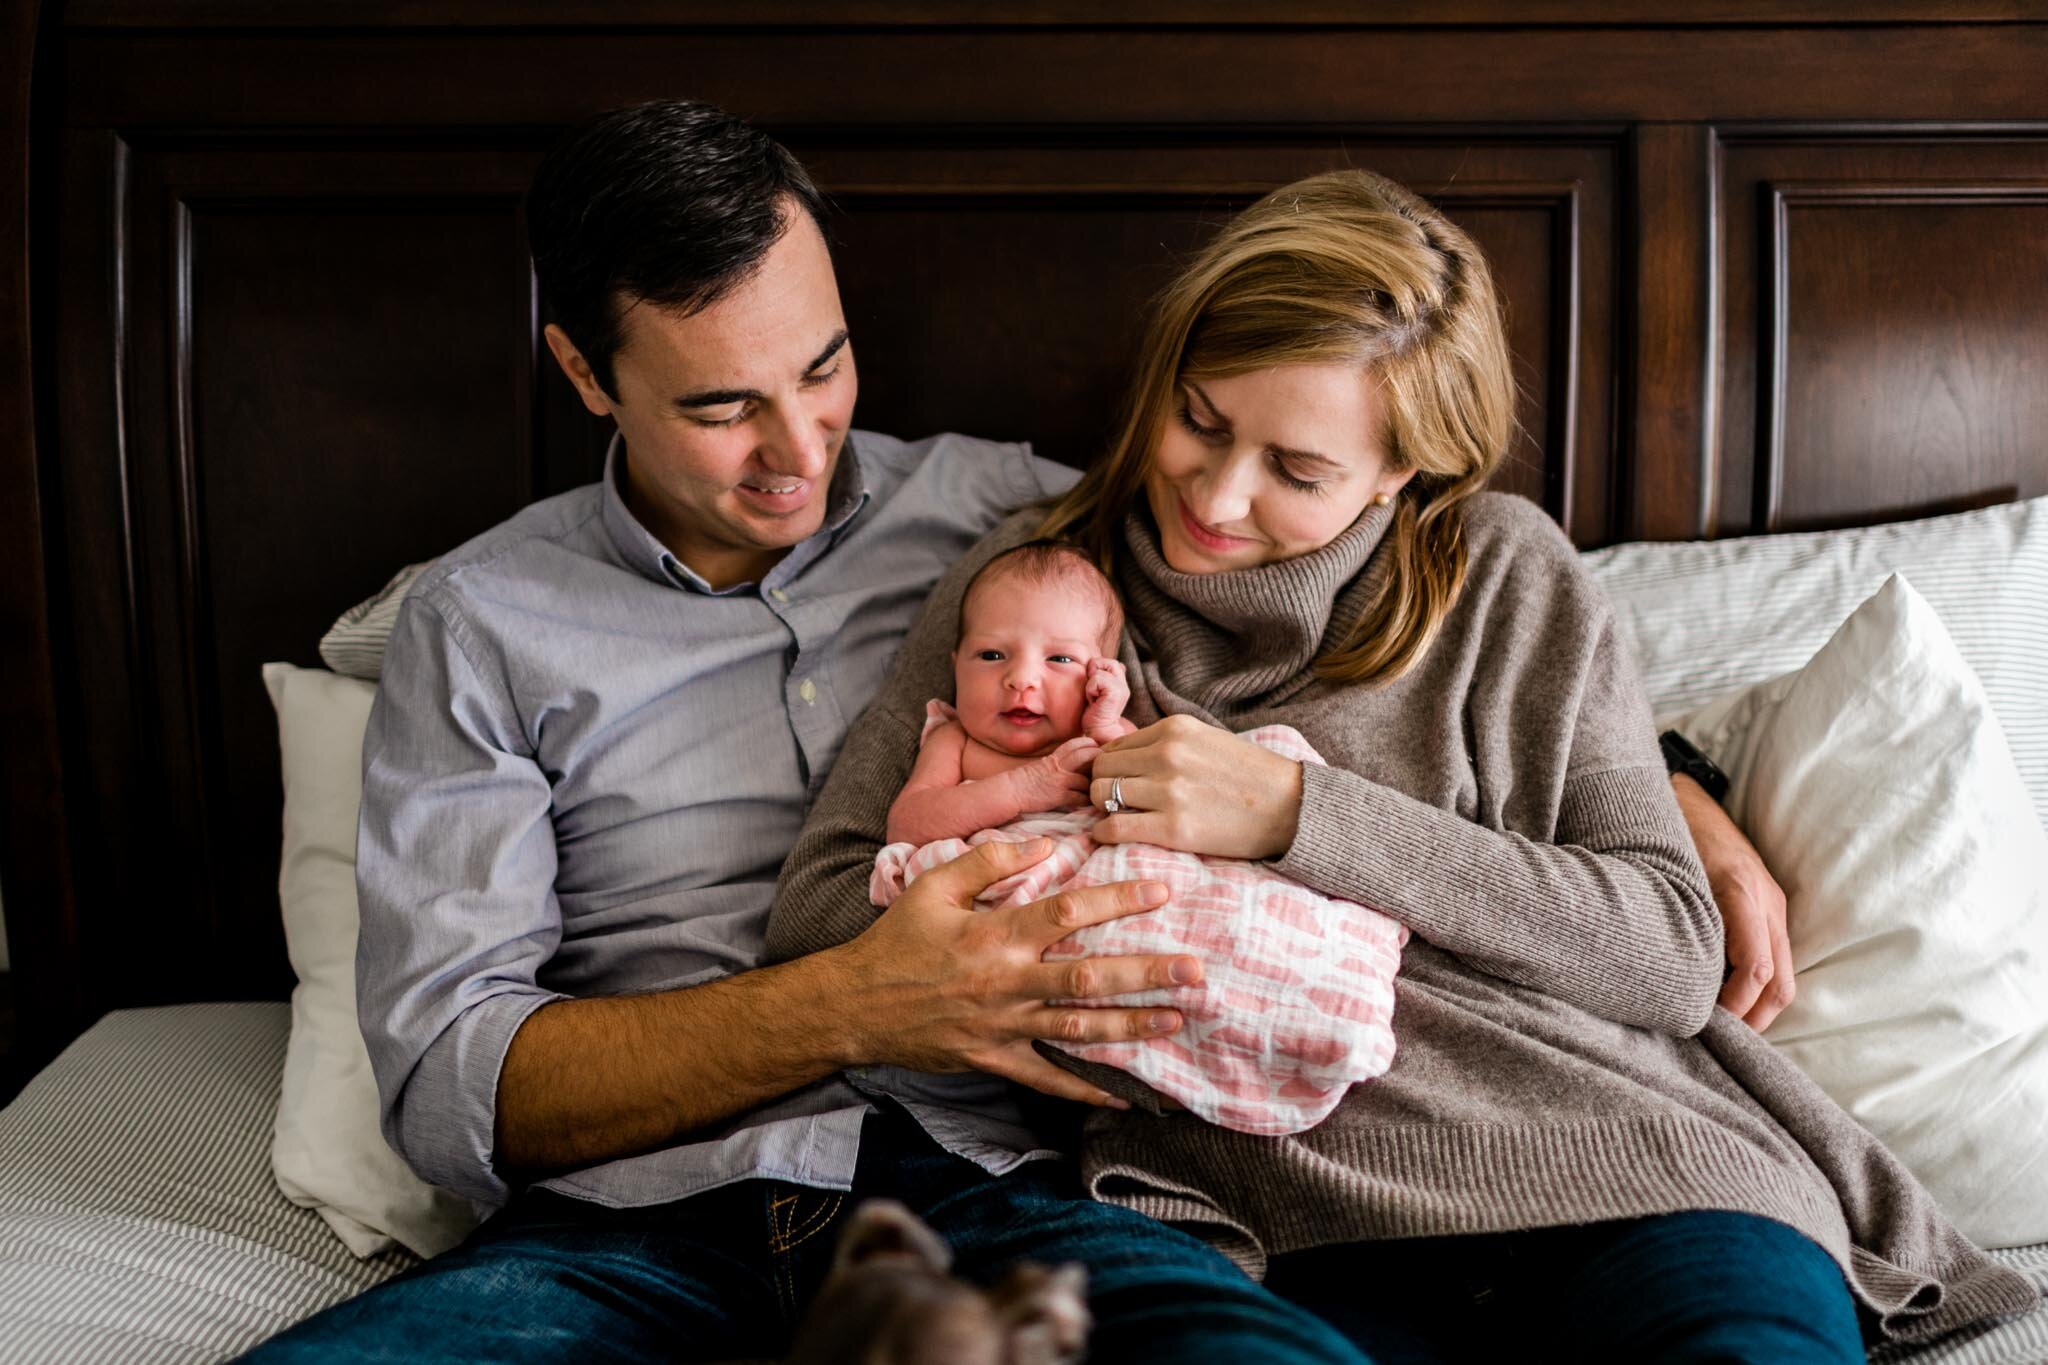 Durham Newborn Photographer | By G. Lin Photography | Parents snuggling on bed with baby girl